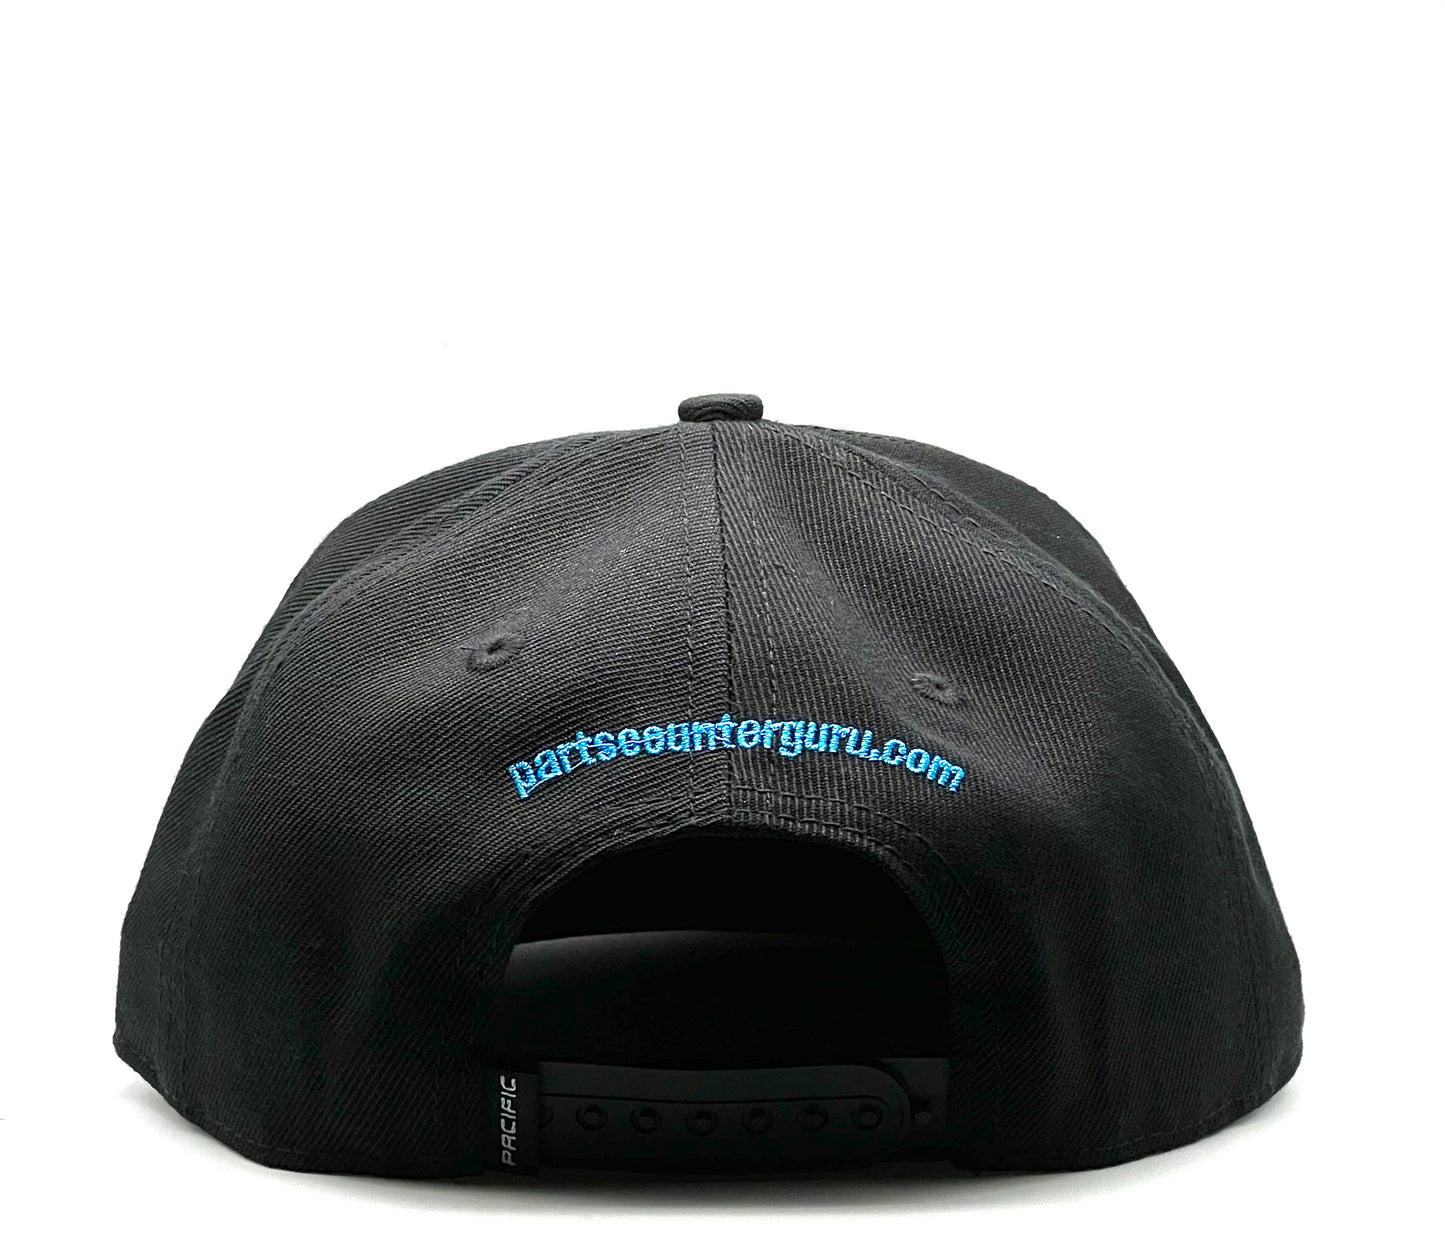 PCG Electrify Expo Limited Edition Hat